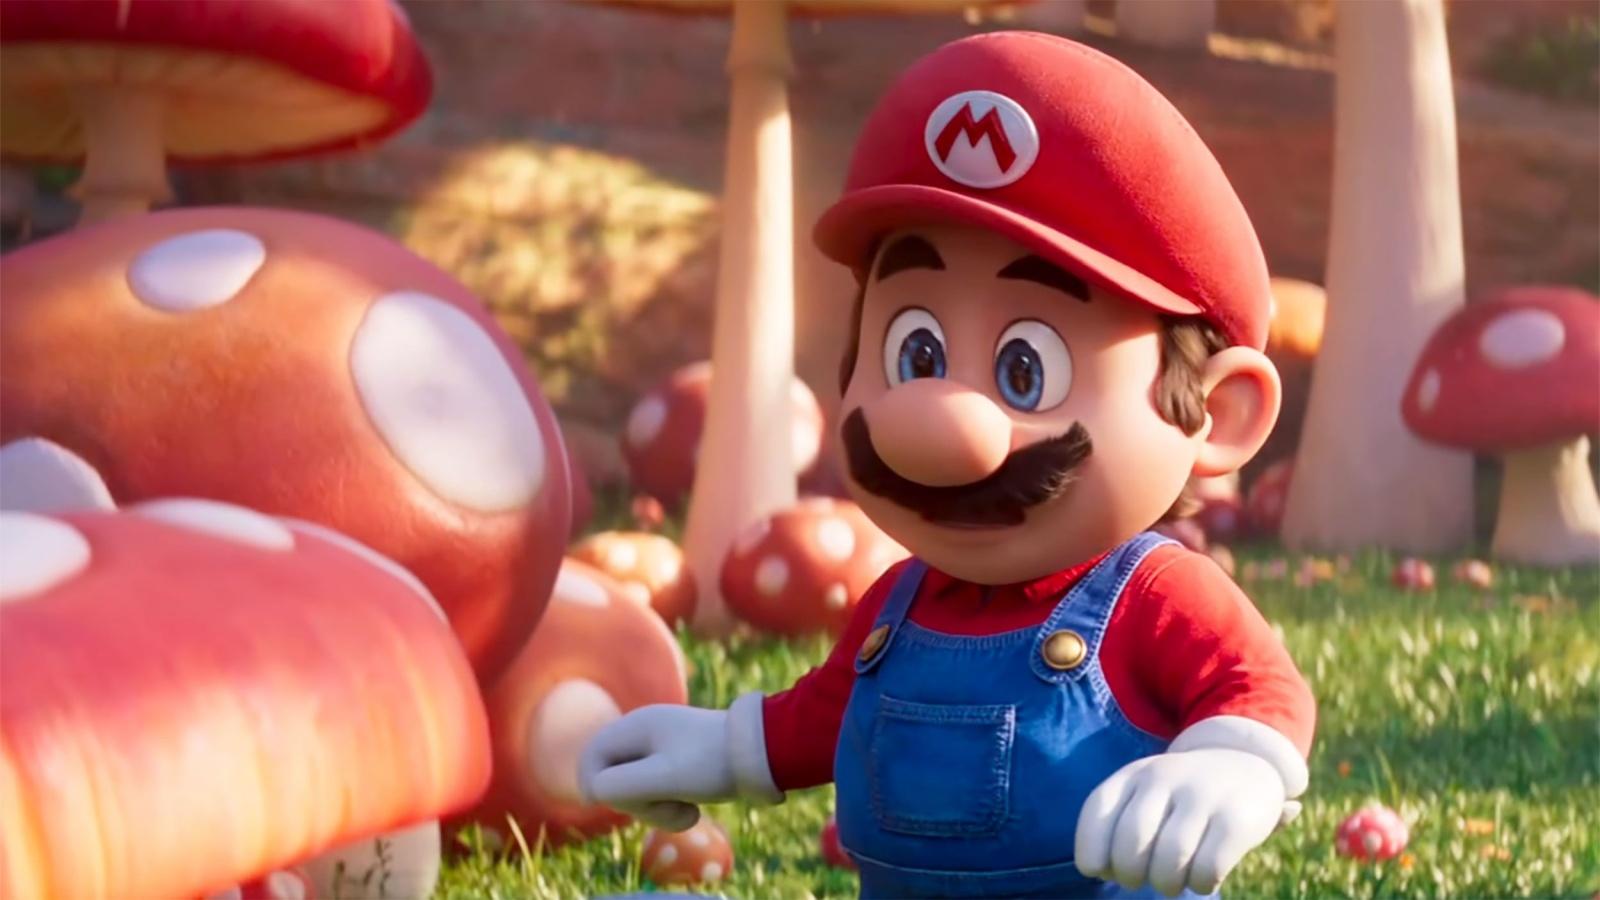 Millions Watched 'The Super Mario Bros. Movie' Illegally on Twitter as Film  Hits $1 Billion Box Office Worldwide